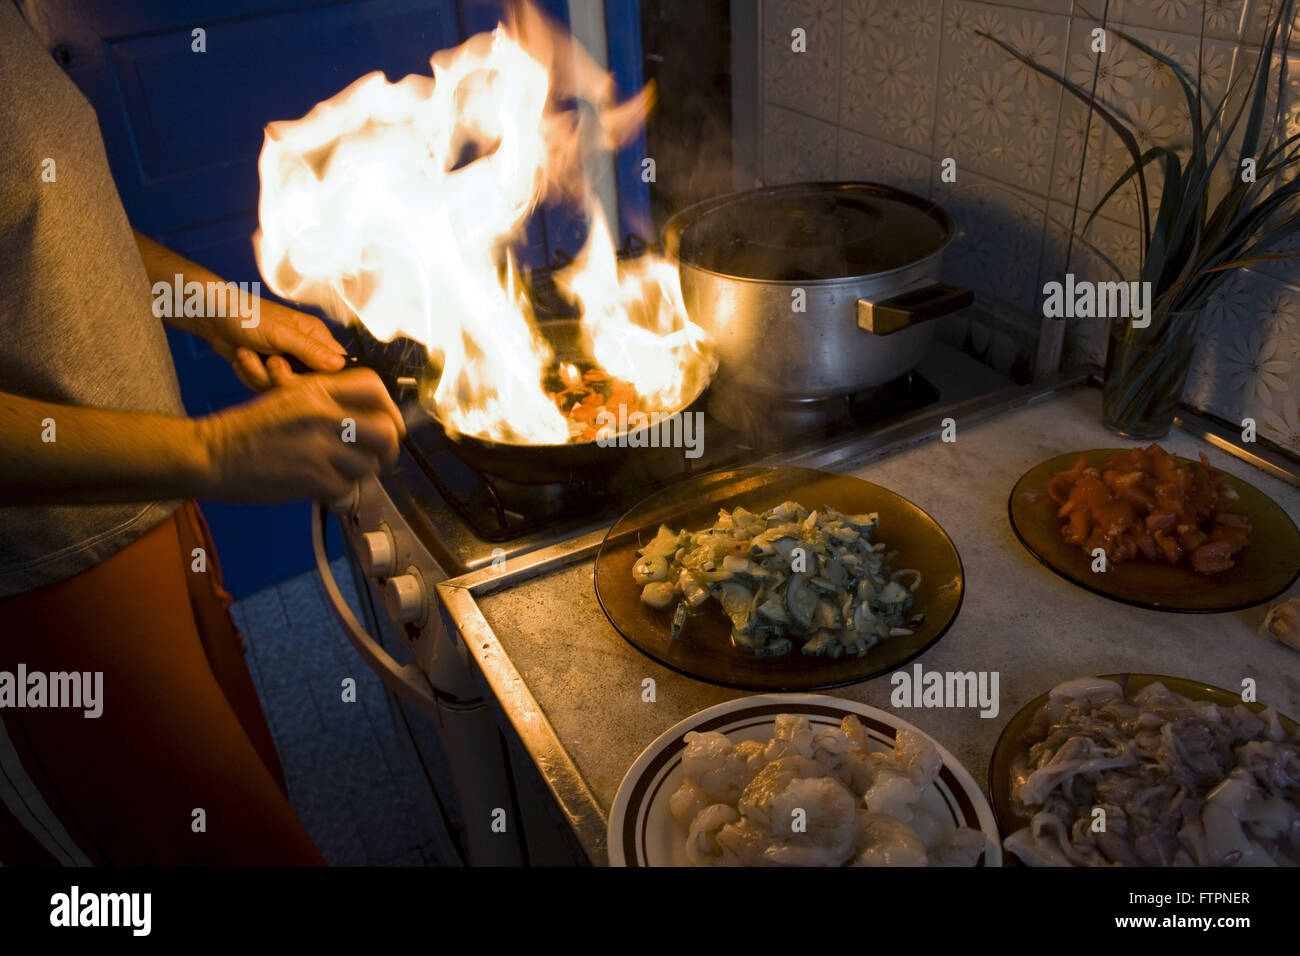 oil for frying on fire during the food preparation Stock Photo